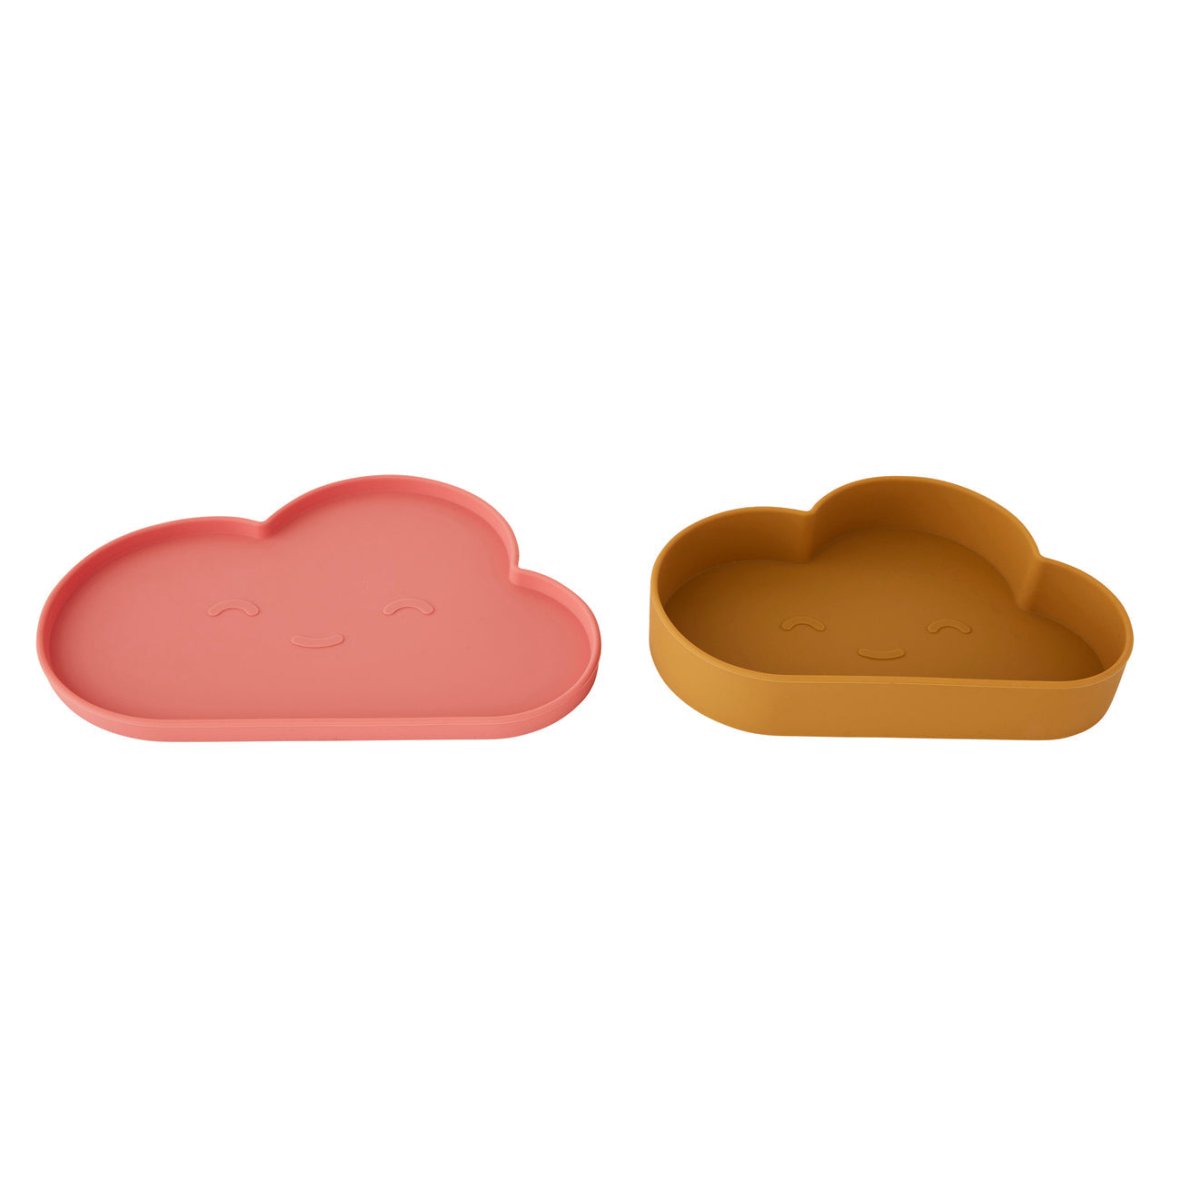 oyoy.us Chloe Cloud Plate & Bowl - Light Rubber / Coral - lily & onyx